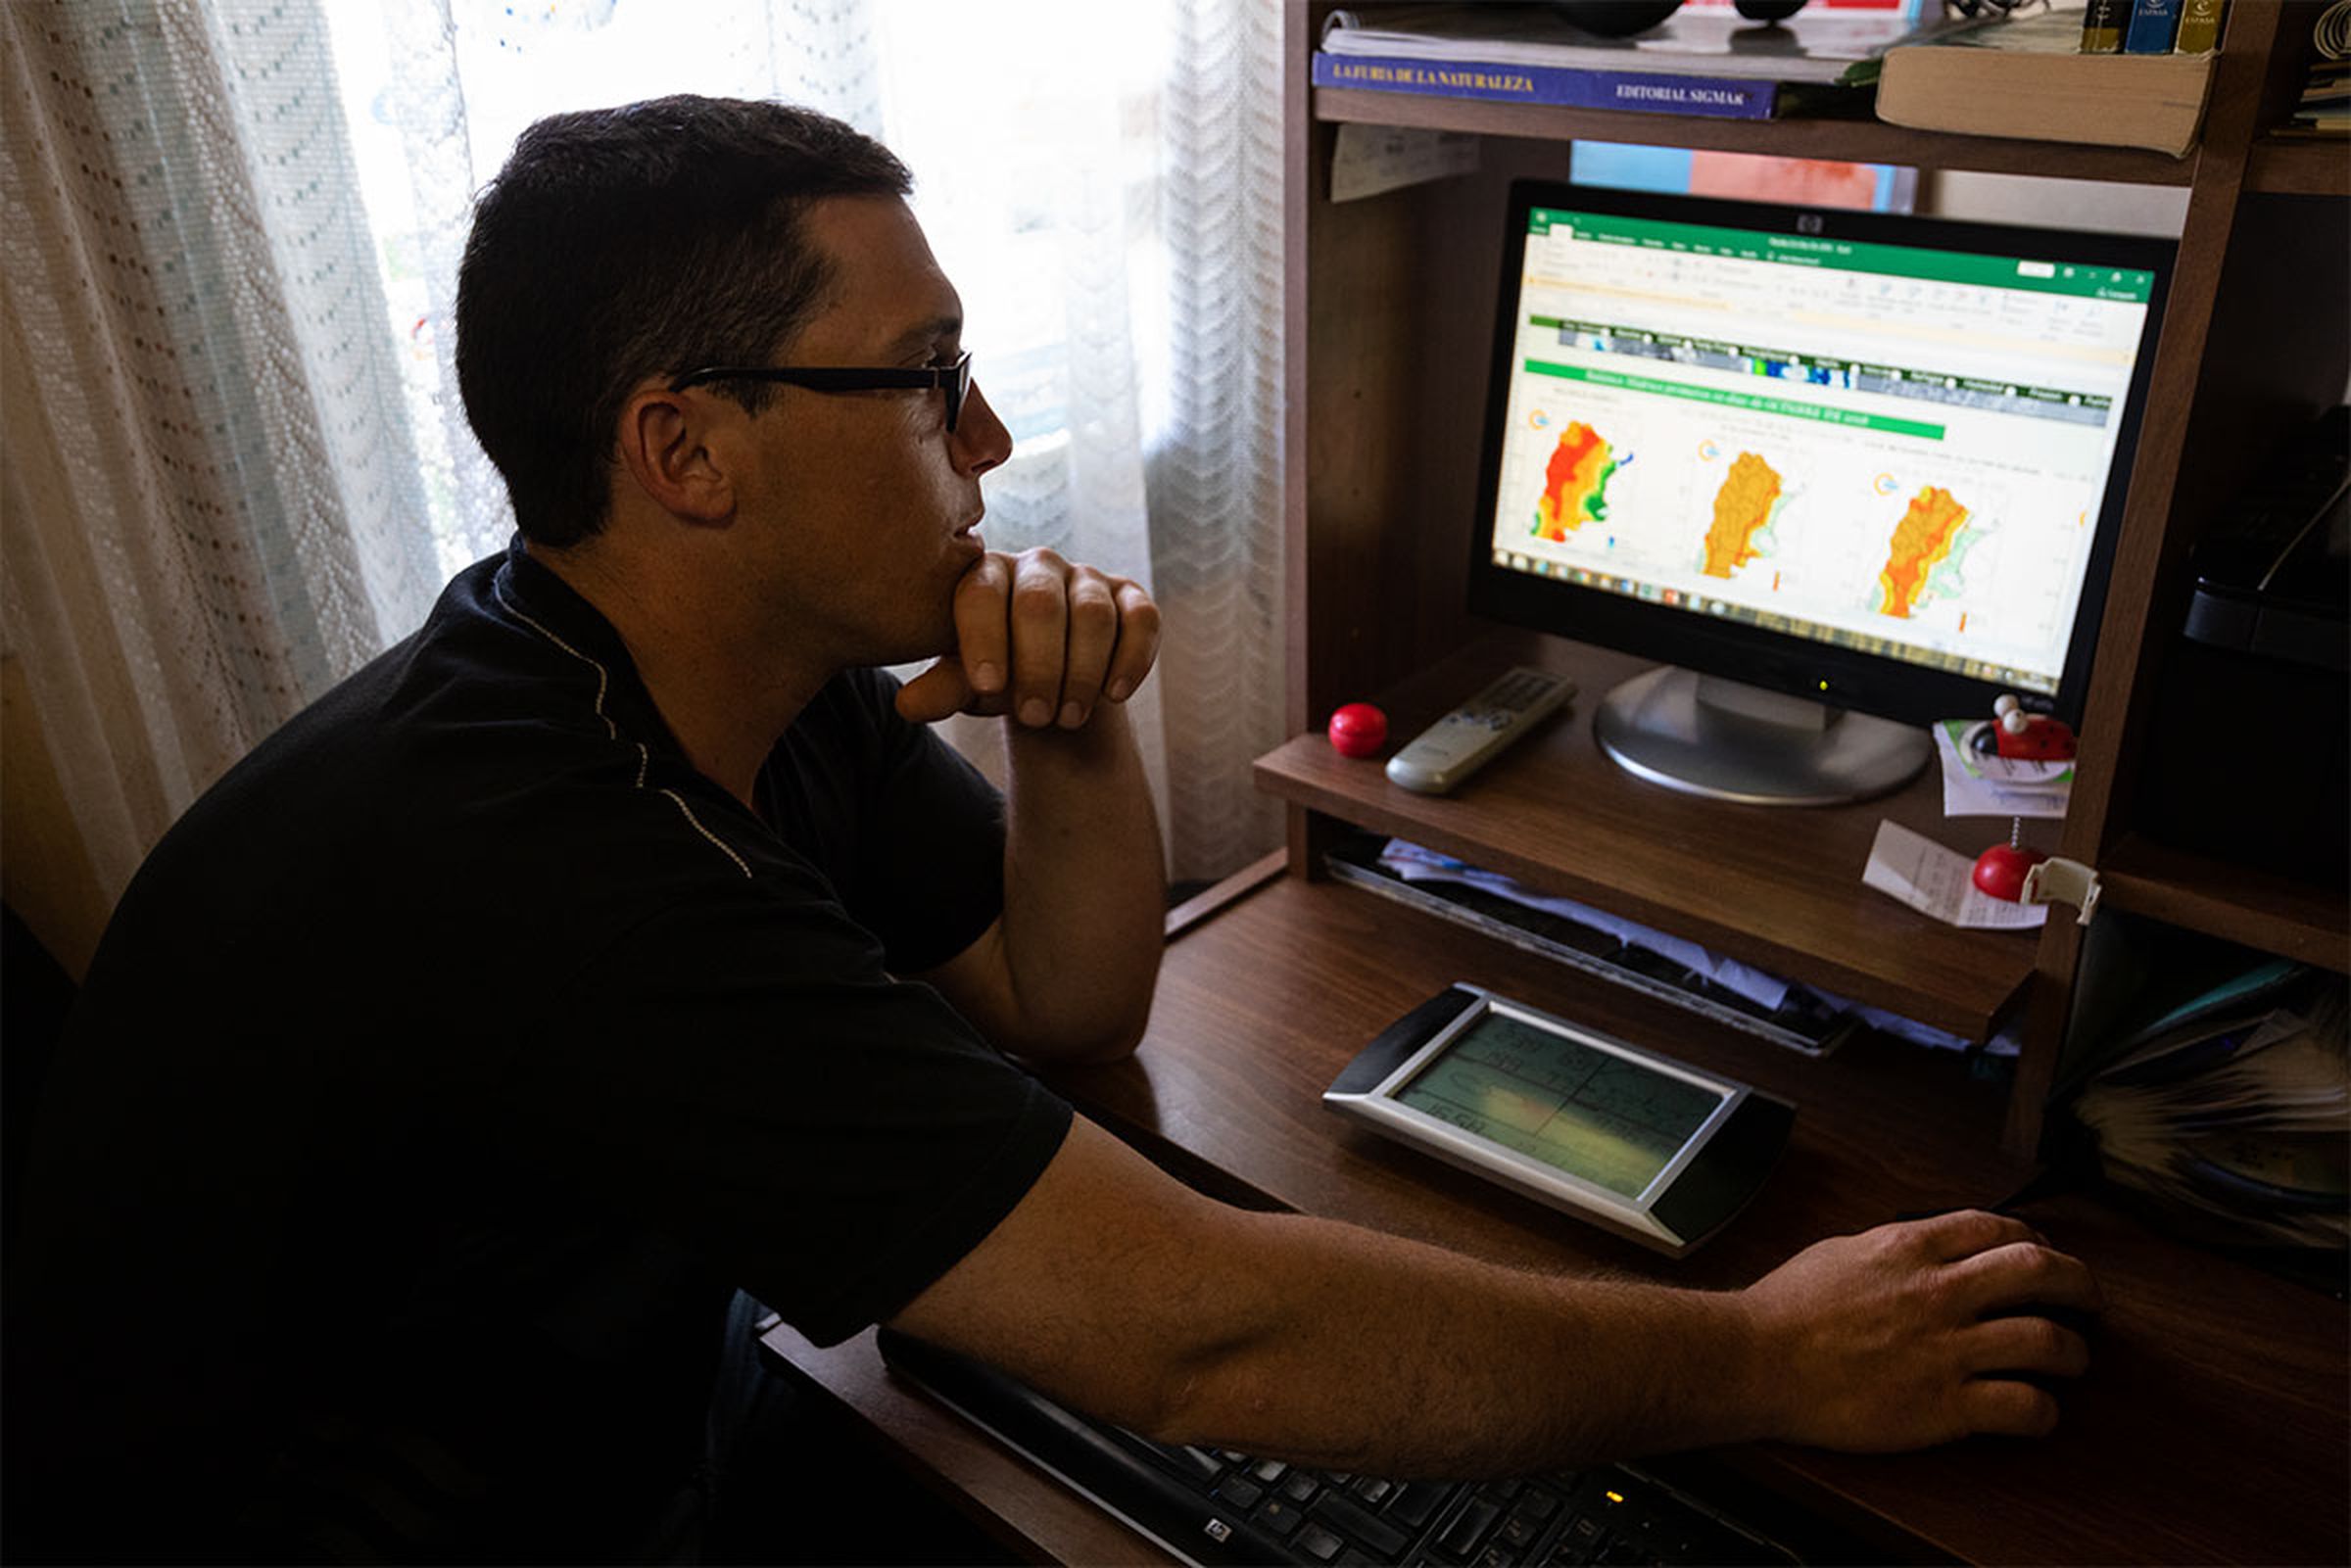 Farmer and amateur meteorologist Matías Lenardón has become a local expert on tracking weather patterns in his region, 50 miles south of Córdoba.